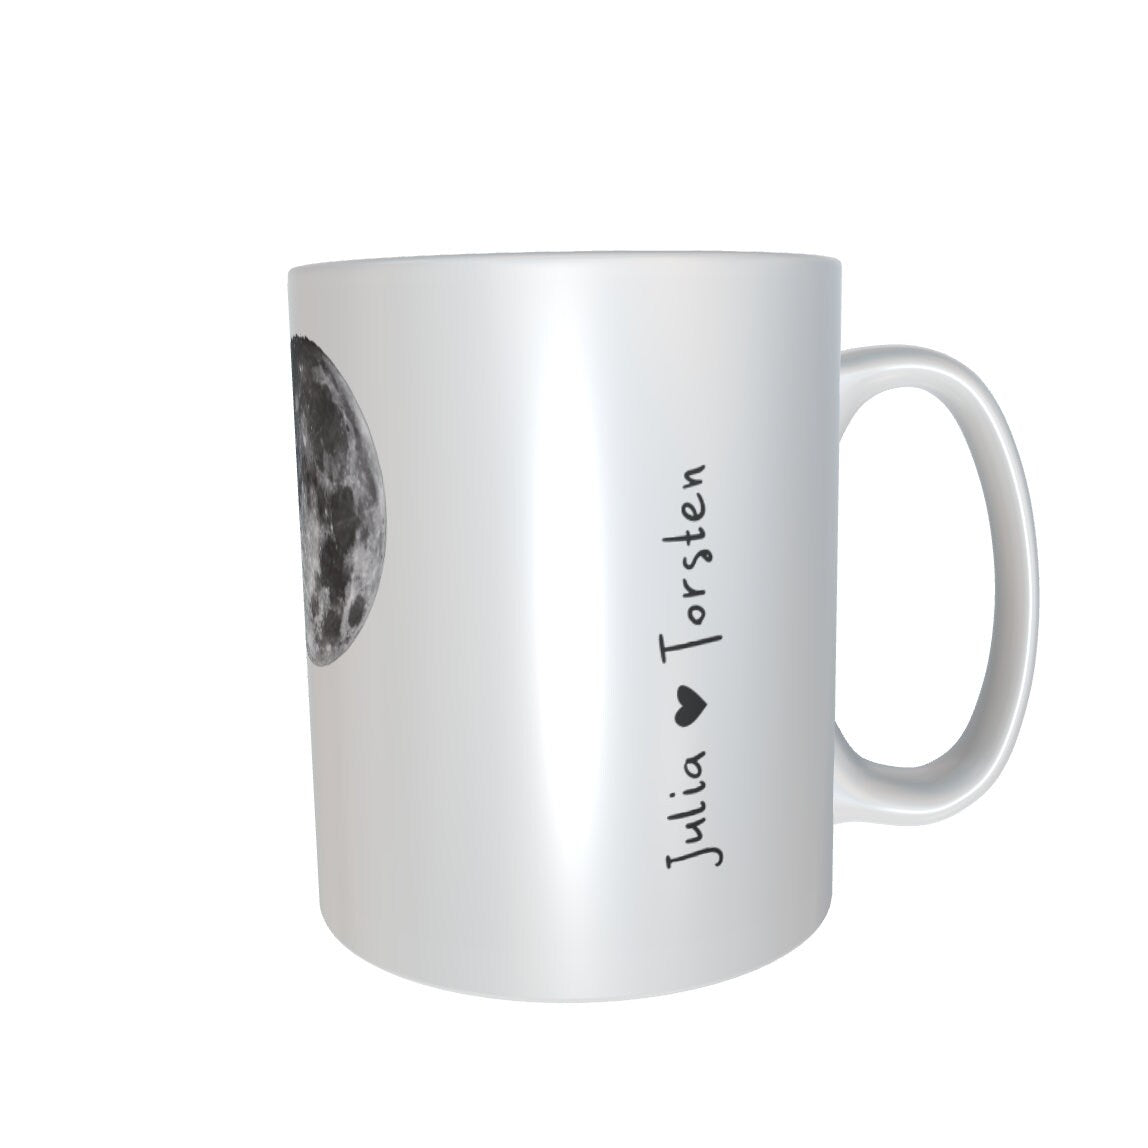 Tasse "To the Moon and back" Personalisierung möglich, Liebe, Valentinstag - Cupsandkisses